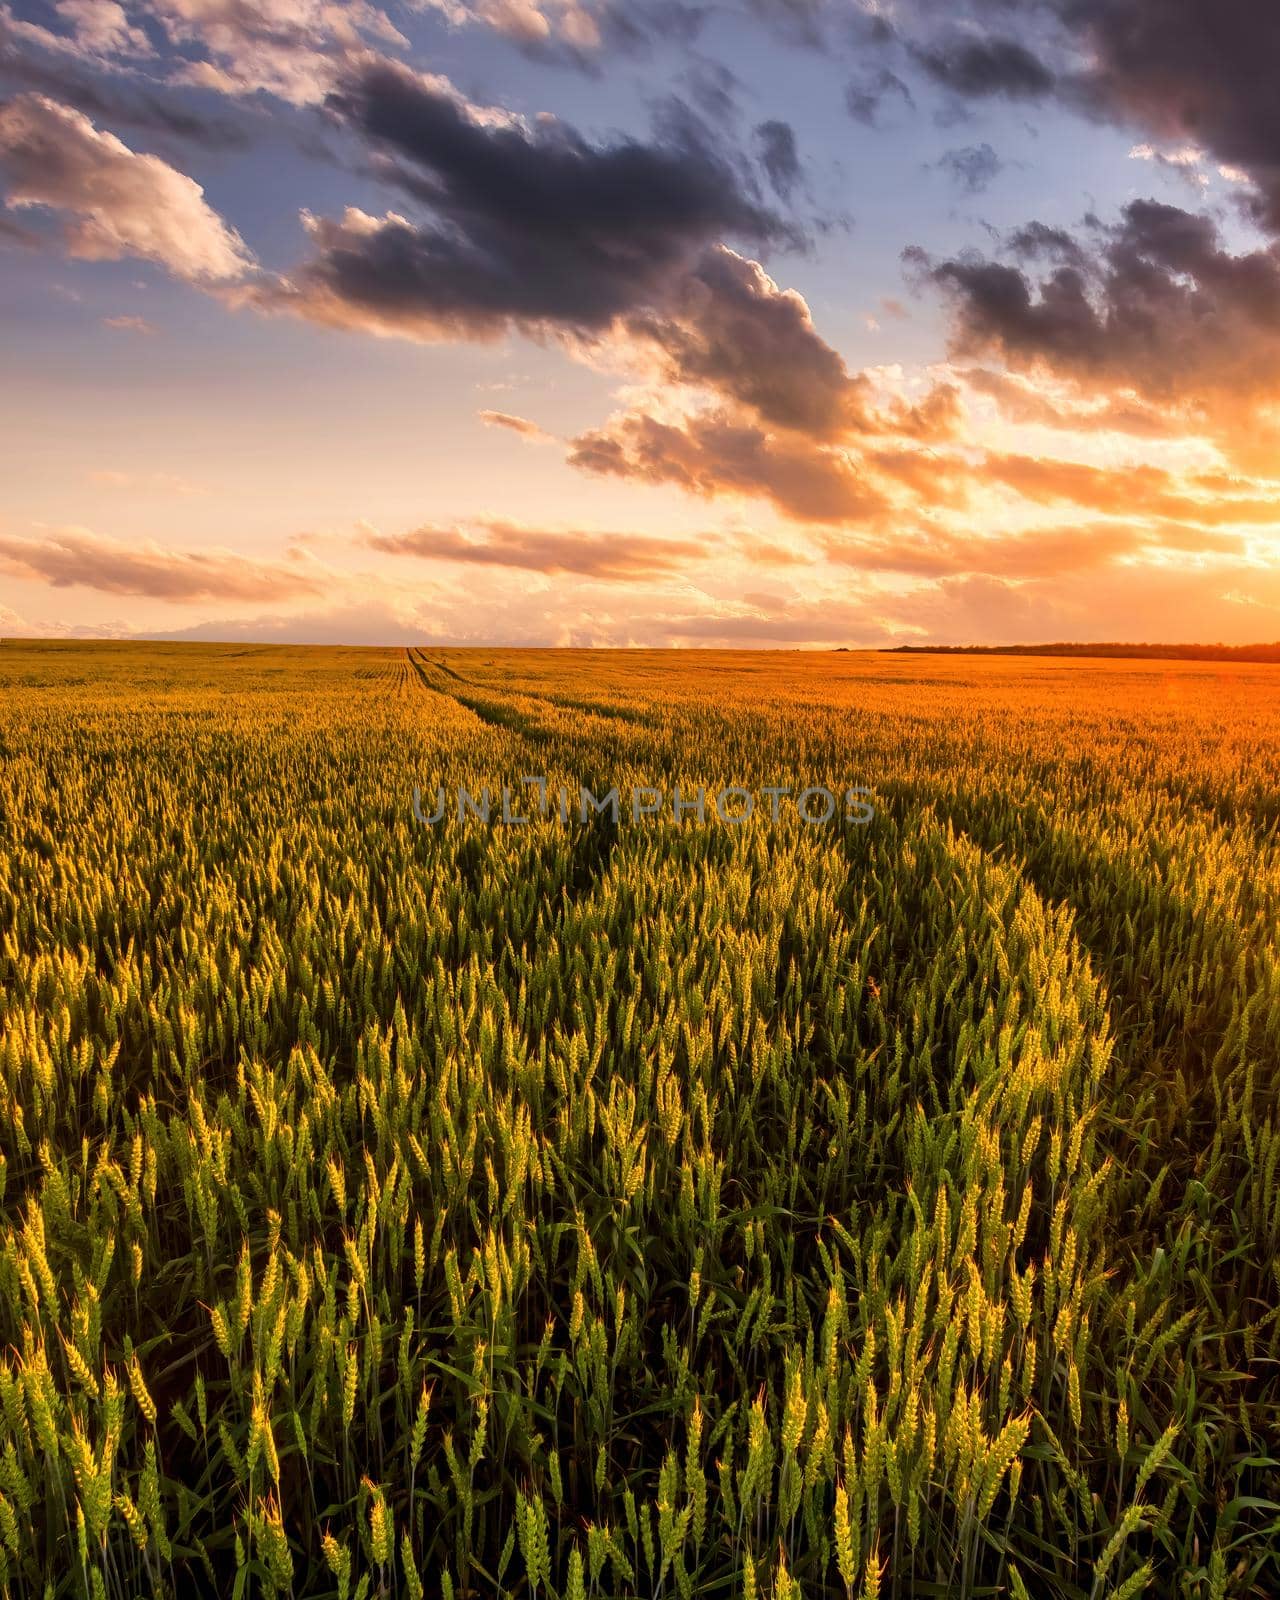 Sunset or sunrise on a wheat field with young green ears and a dramatic cloudy sky. 